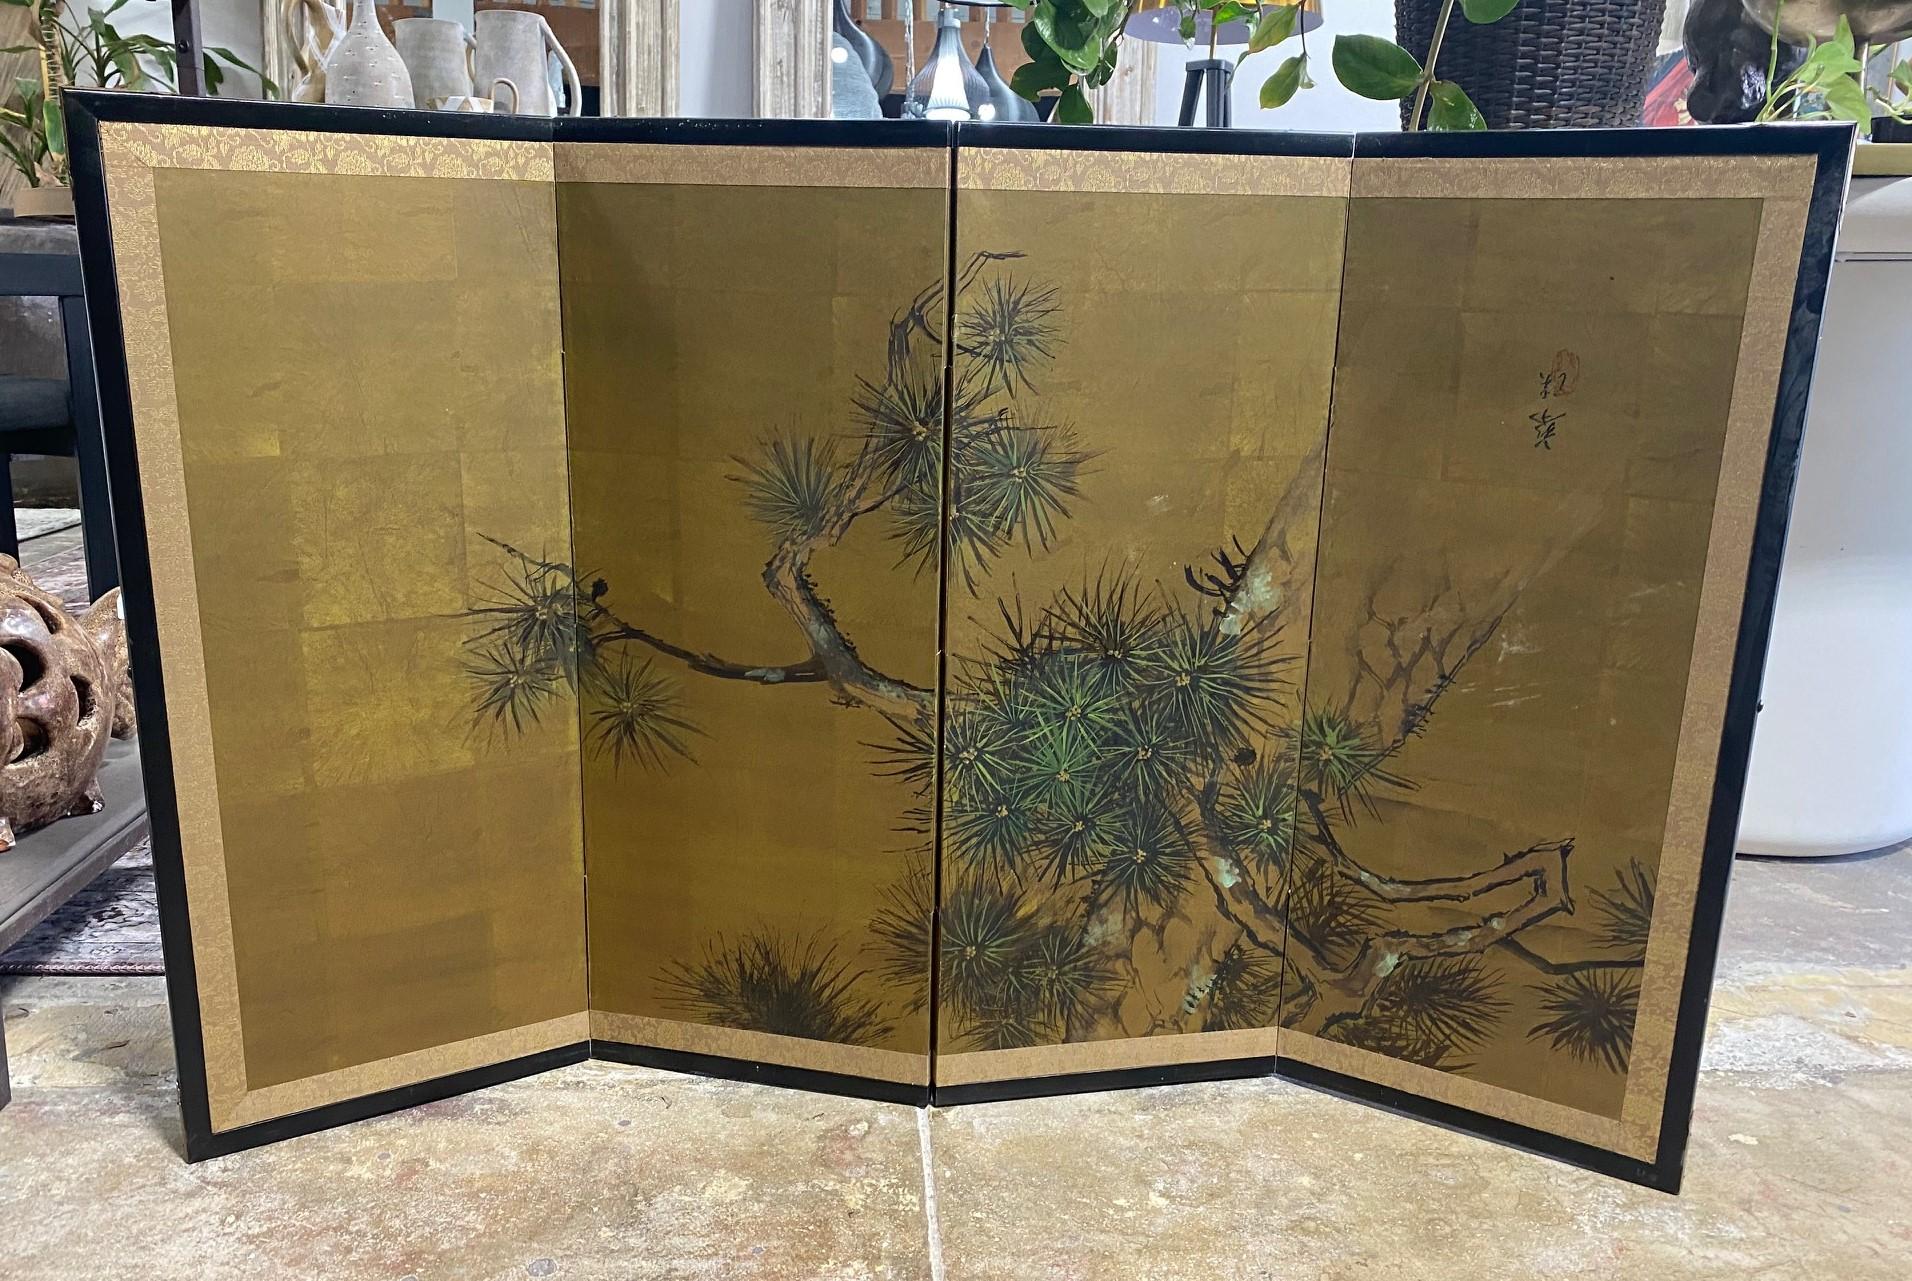 A gorgeous four-panel Japanese Byobu folding screen depicting a nature scene with an extended pine tree branch. The dark, rich colors, gold leaf, and beautiful hand-painted detail of the tree's thistles make this an attractive and special